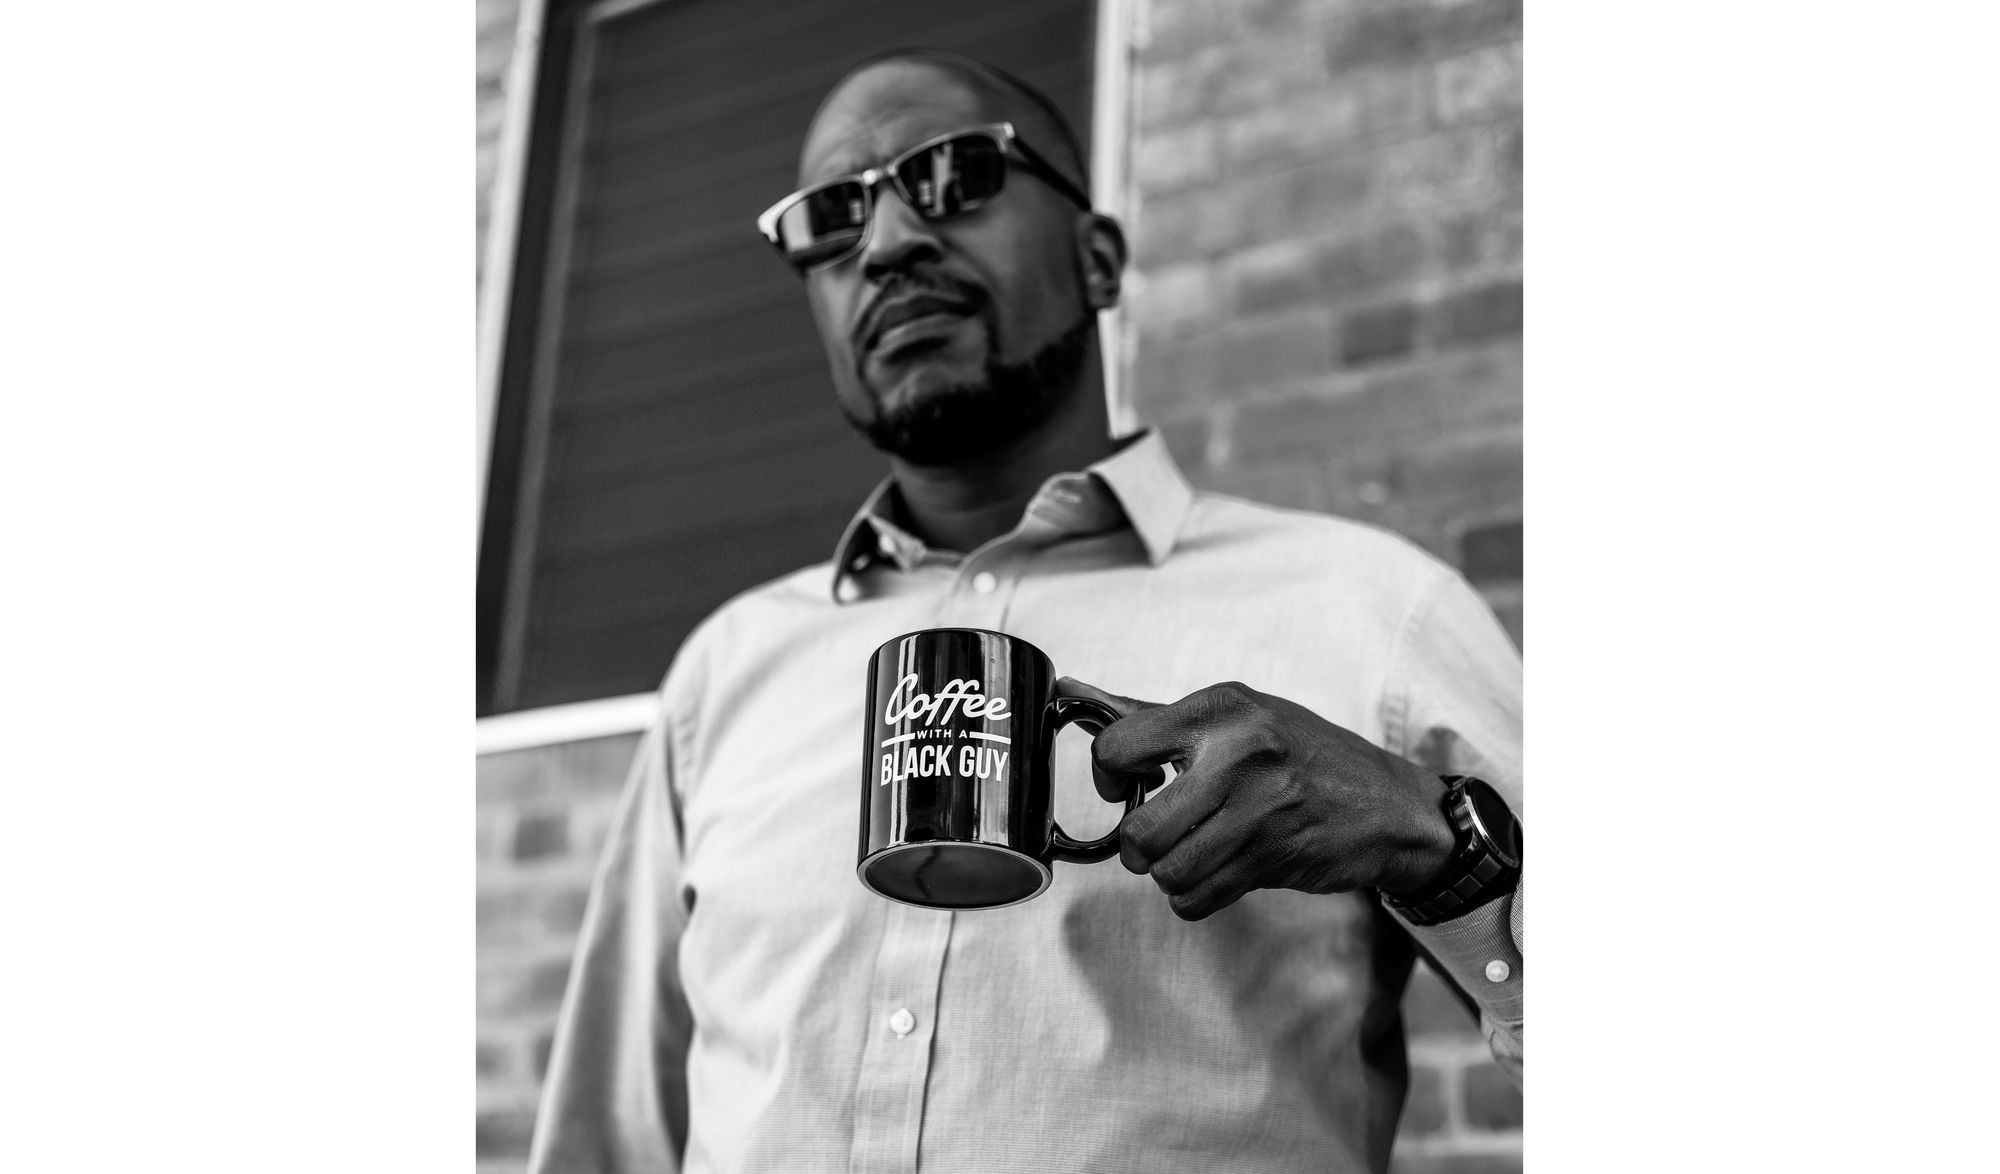 An Innovative Social Impact Movement - Coffee With A Black Guy